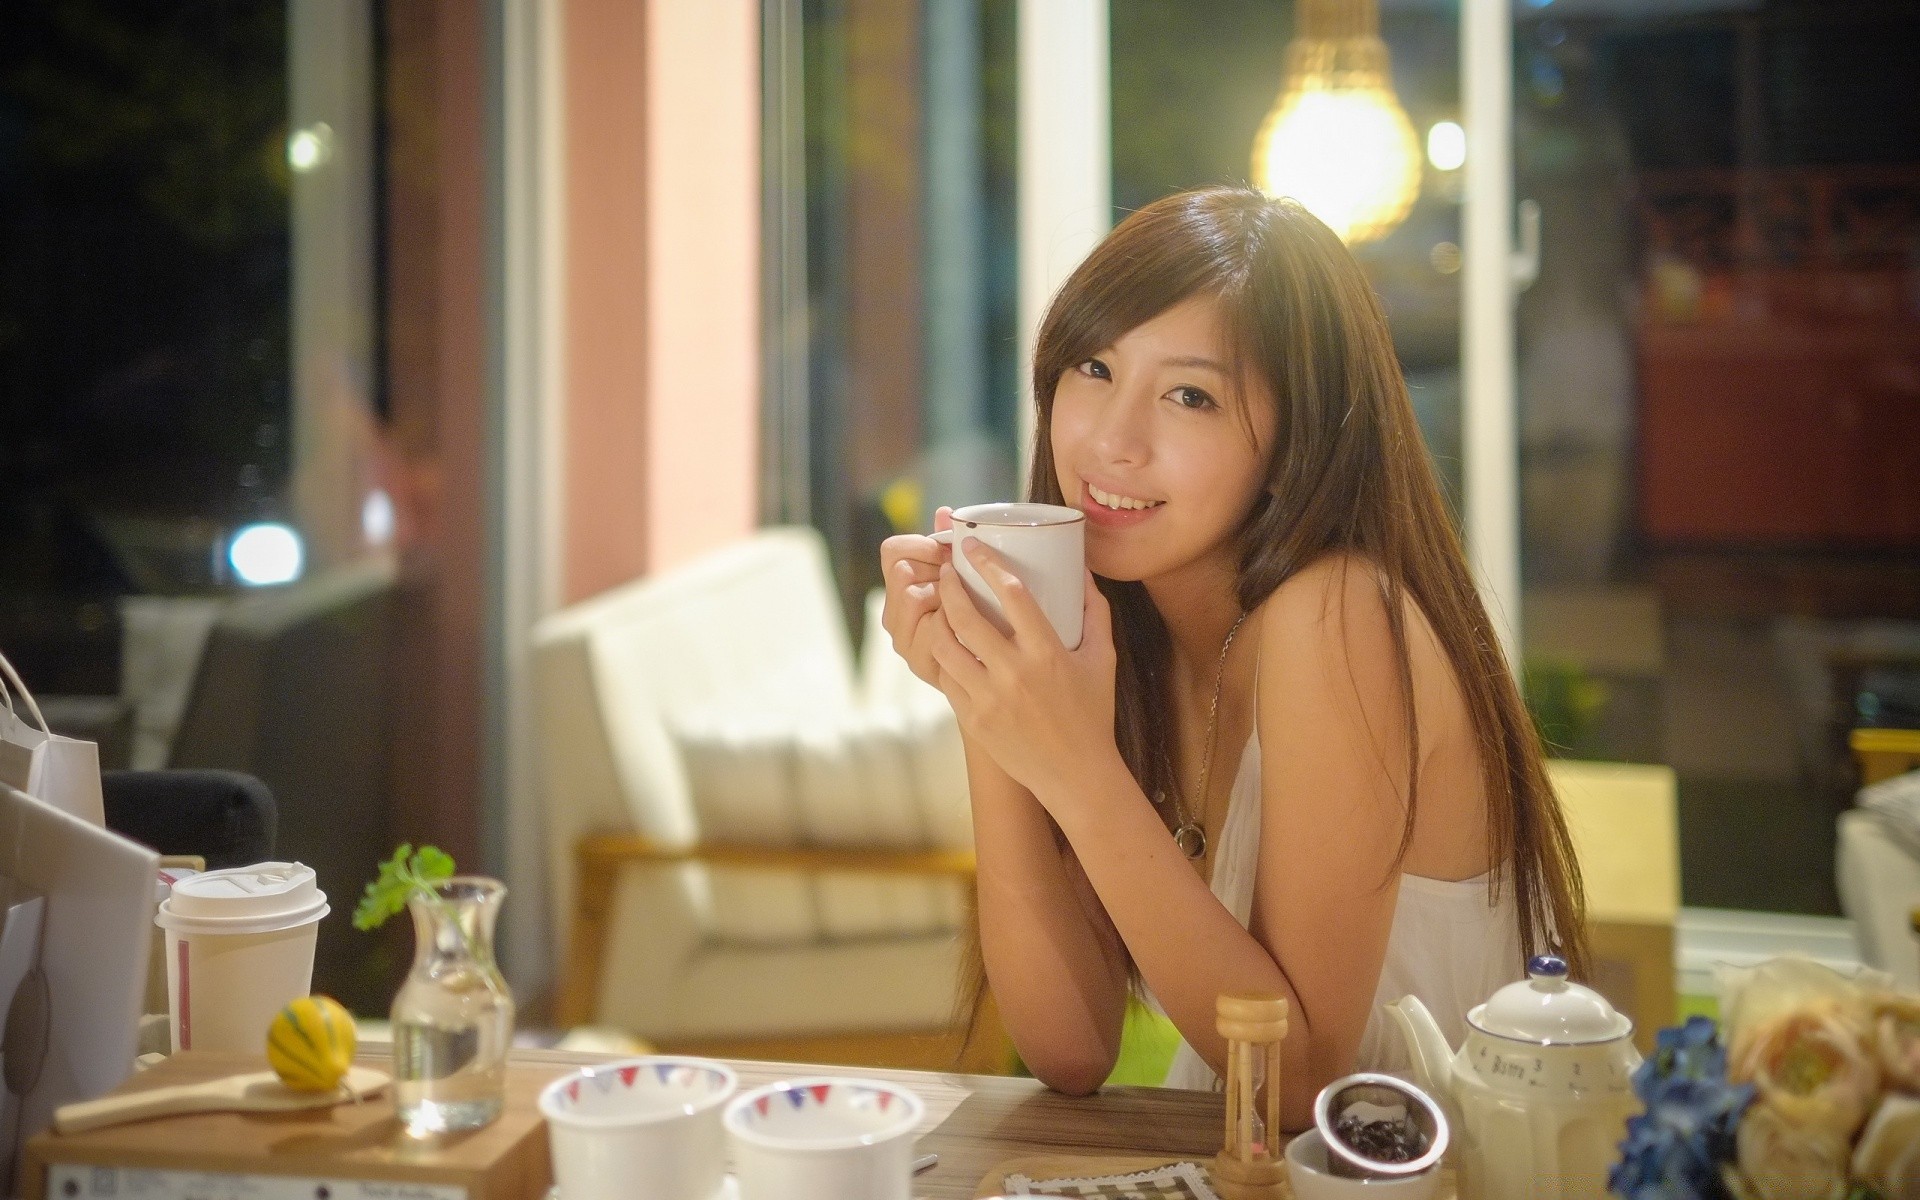 the other girls coffee tea woman indoors cup breakfast drink sit enjoyment table adult dawn restaurant room relaxation leisure furniture coffee cup